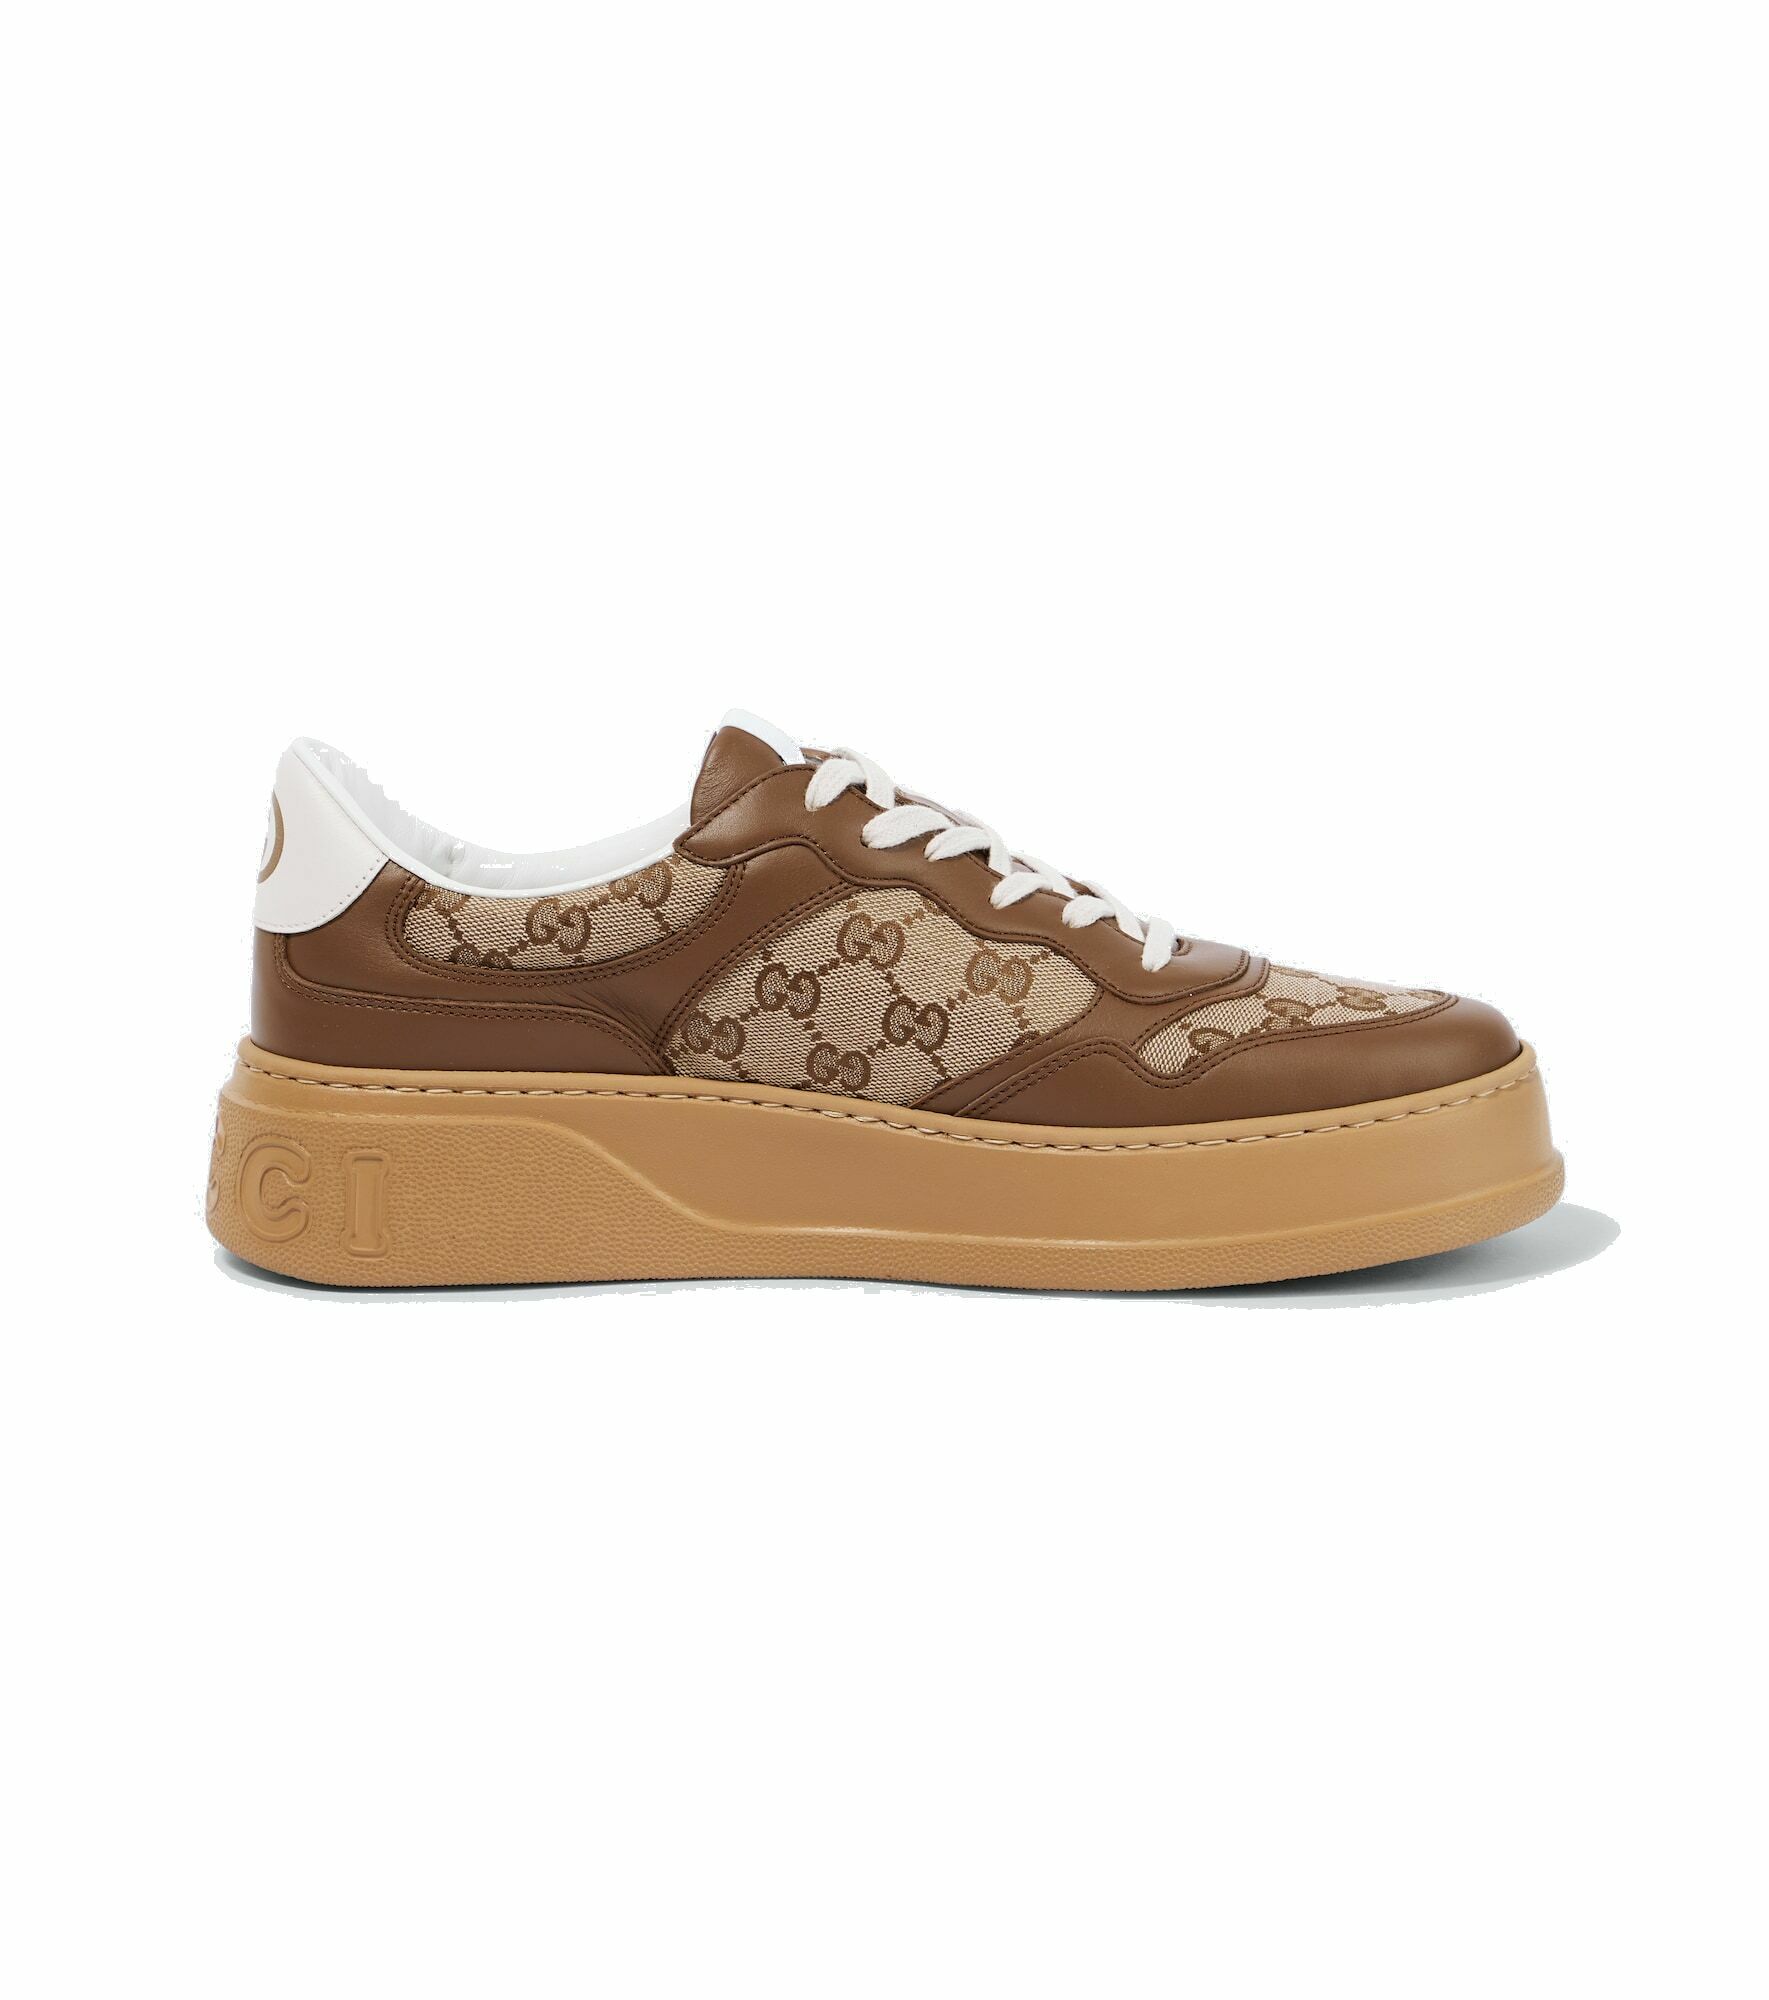 Gucci - GG leather-trimmed canvas sneakers Gucci